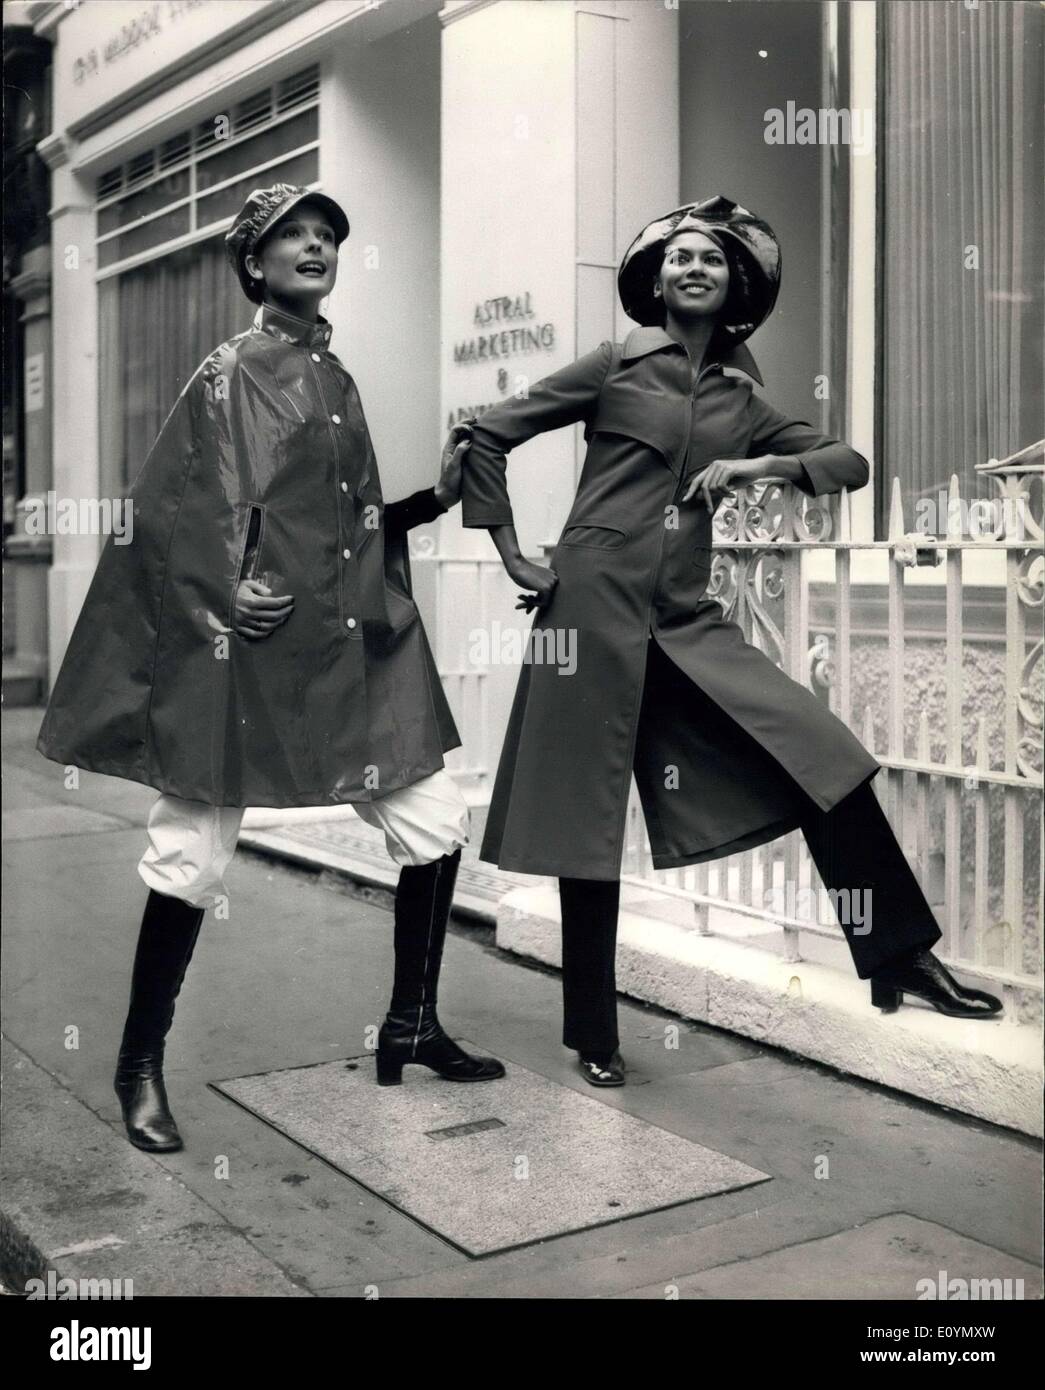 Oct. 27, 1970 - ALLIGATOR RAIN WEAR'S SPRING 1971 COLLECTION. ALLIGATOR today showed their Spring 1971 Rain wear Collection, which included a range of coats and capes by Pierre Cardin, the famous Paris designer. KEYSTONE PHOTO SHOWS: Model SHOSHANA wears ''Caper'', a P.V.C. single breasted cape from Alligator's Spring 1971 rain wear range., with contrast stitching around the standa way collar, stud tab and arm openings, worm with white P.V.C. knickerbackers-and on right, model SONIA wears ''Elysee''-one of Pierre Cardin's designs for Alligator Rain wear-a midi zip-up raincoat in Travira Rayen Stock Photo